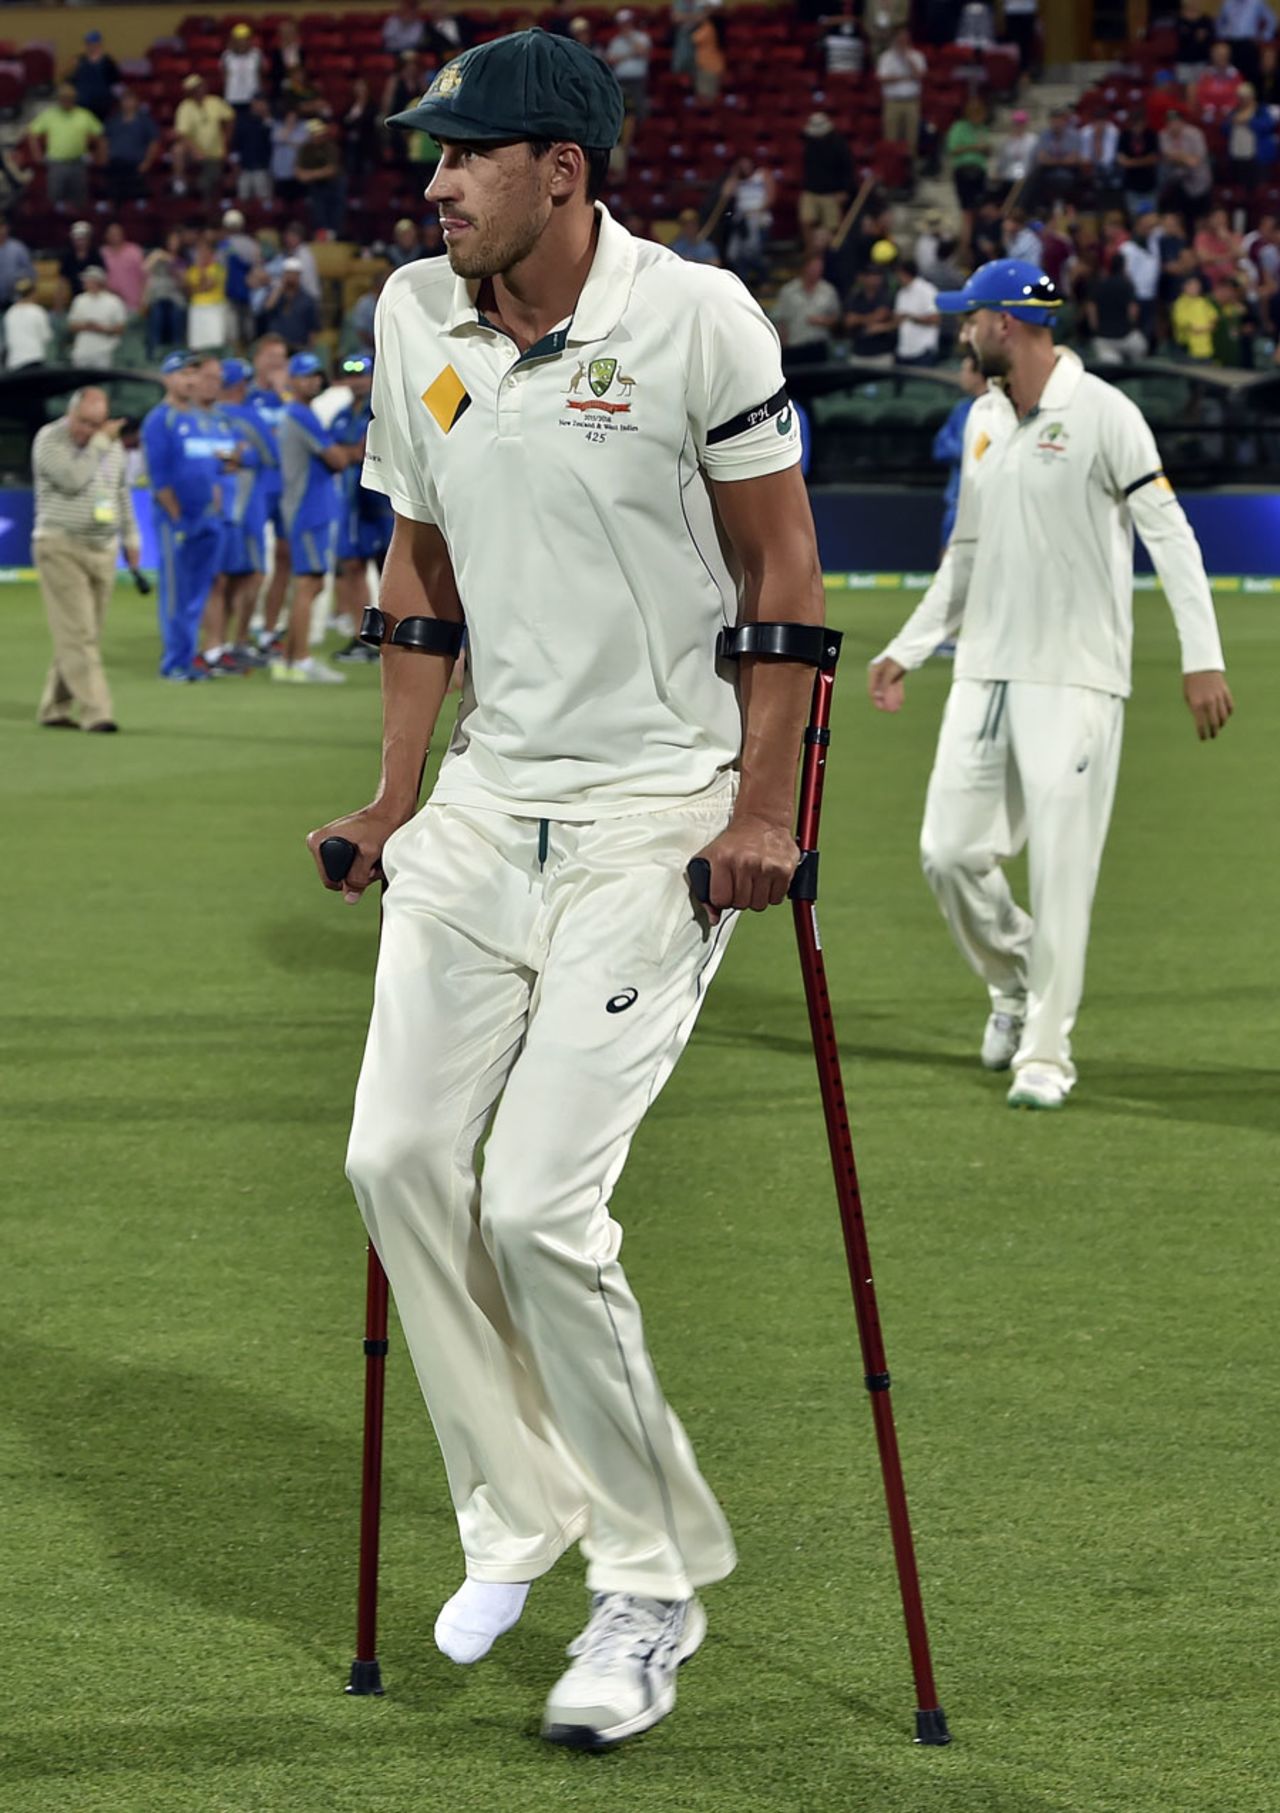 Mitchell Starc walks on to the field in crutches, Australia v New Zealand, 3rd Test, Adelaide, 3rd day, November 29, 2015